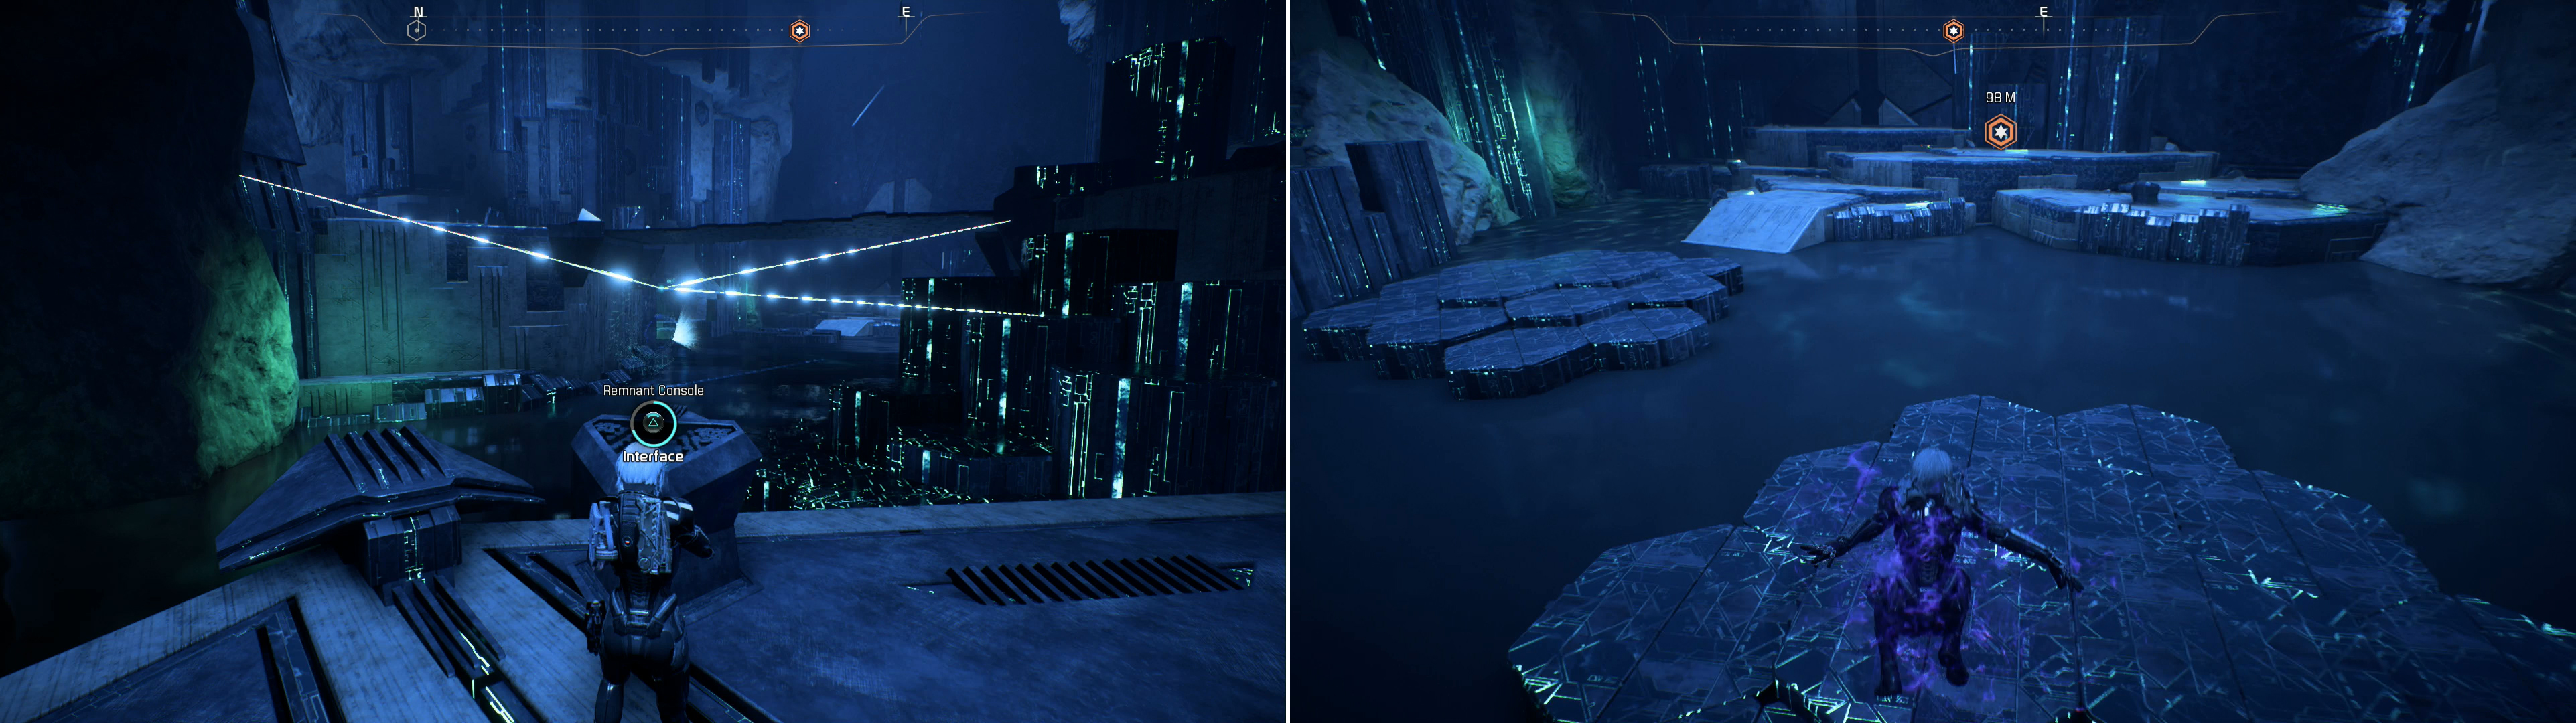 Return to the beginning of the vault and activate the previously ignored Remnant Console (left) then leap across the "lily pad" platforms deployed by aforementioned console (right).